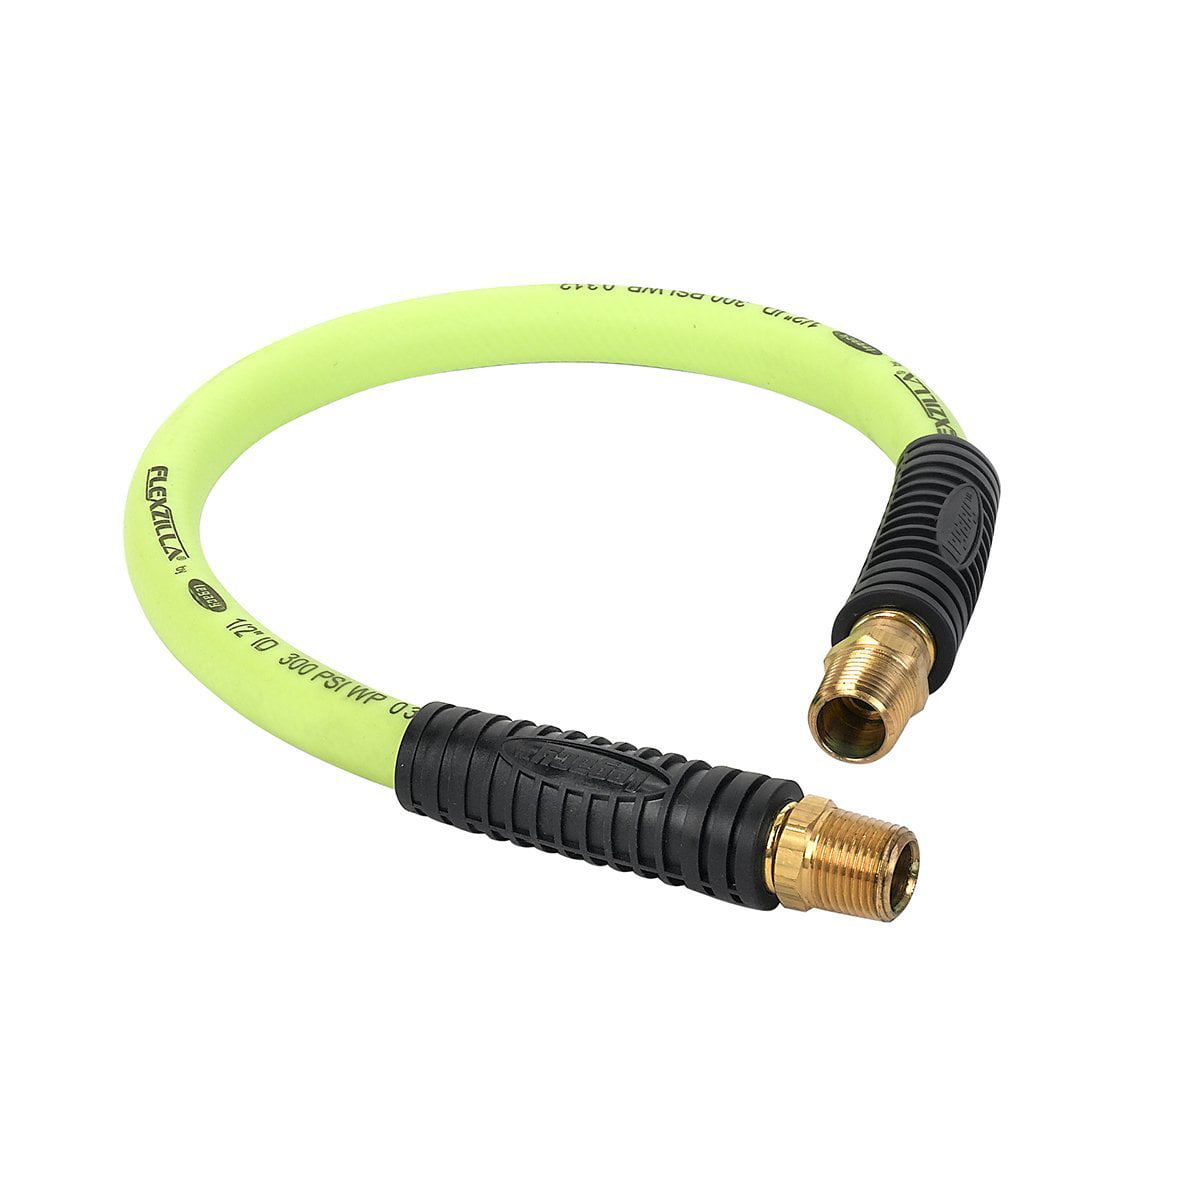 New Flexzilla 1/2" x 2' FT Air Hose Whip With 1/2' MNPT Swivel HFZ1202YW4S 